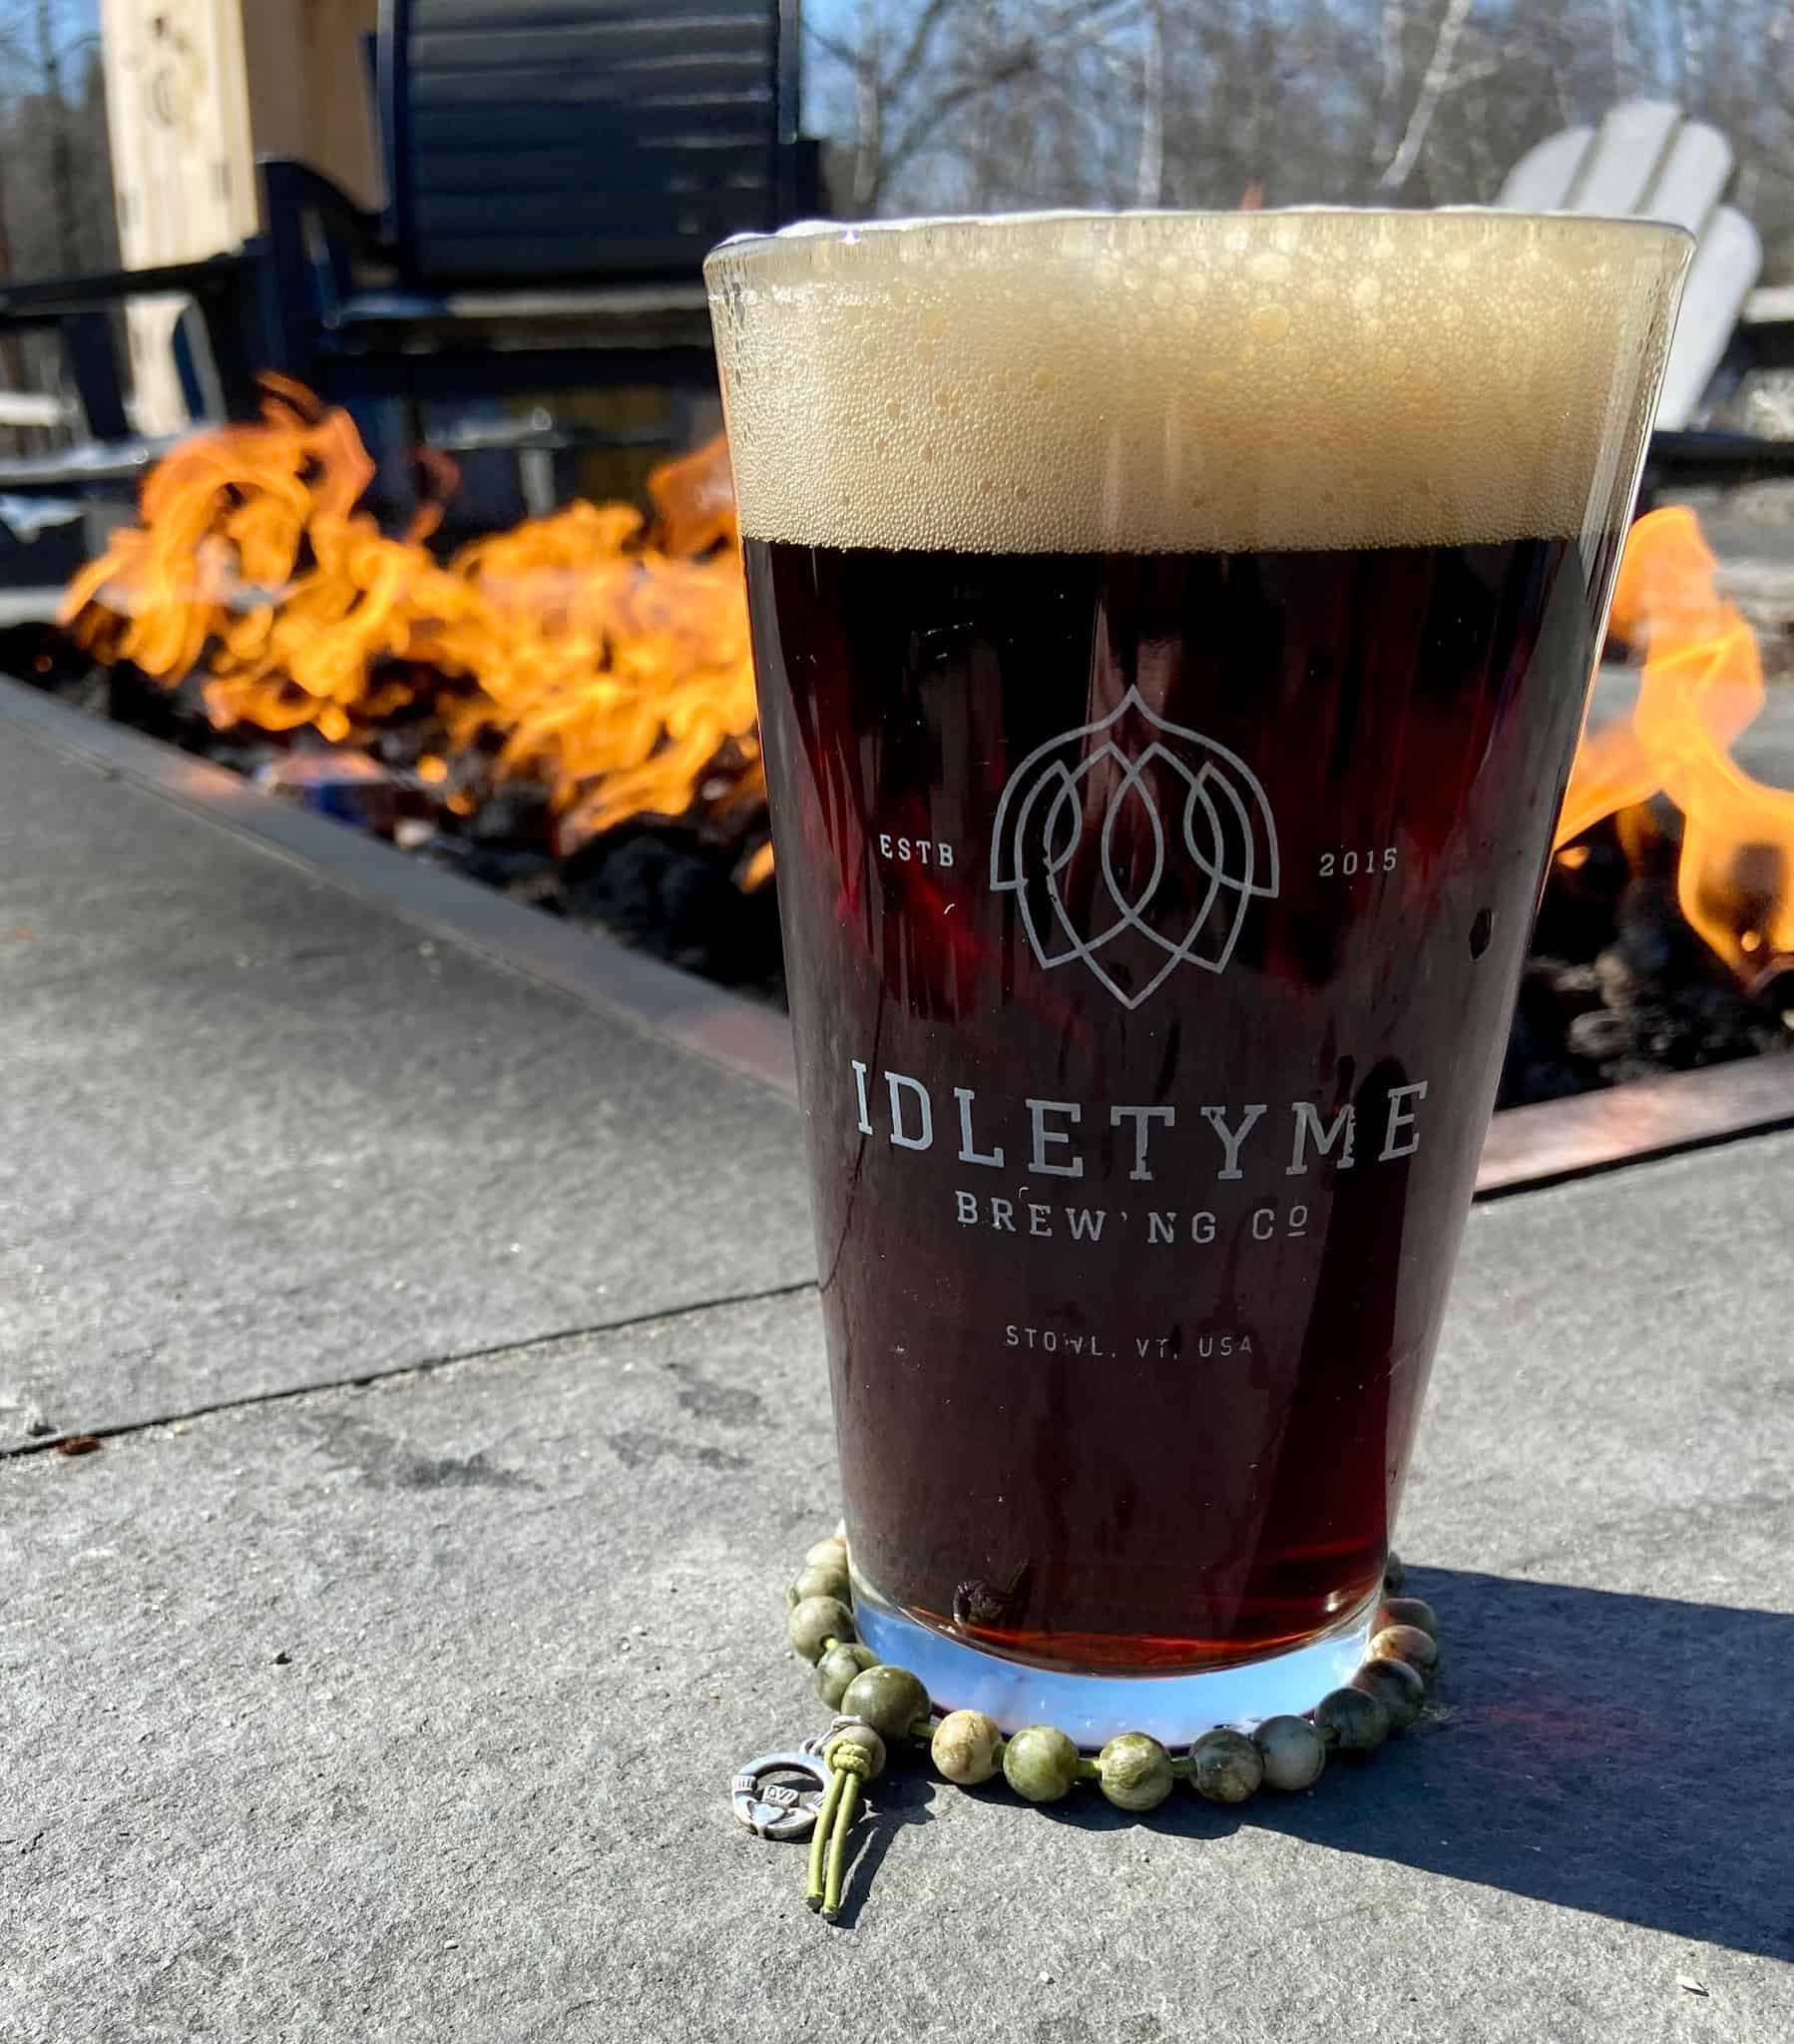 Idletyme Brewing Company - Beer with Outdoor Firepit